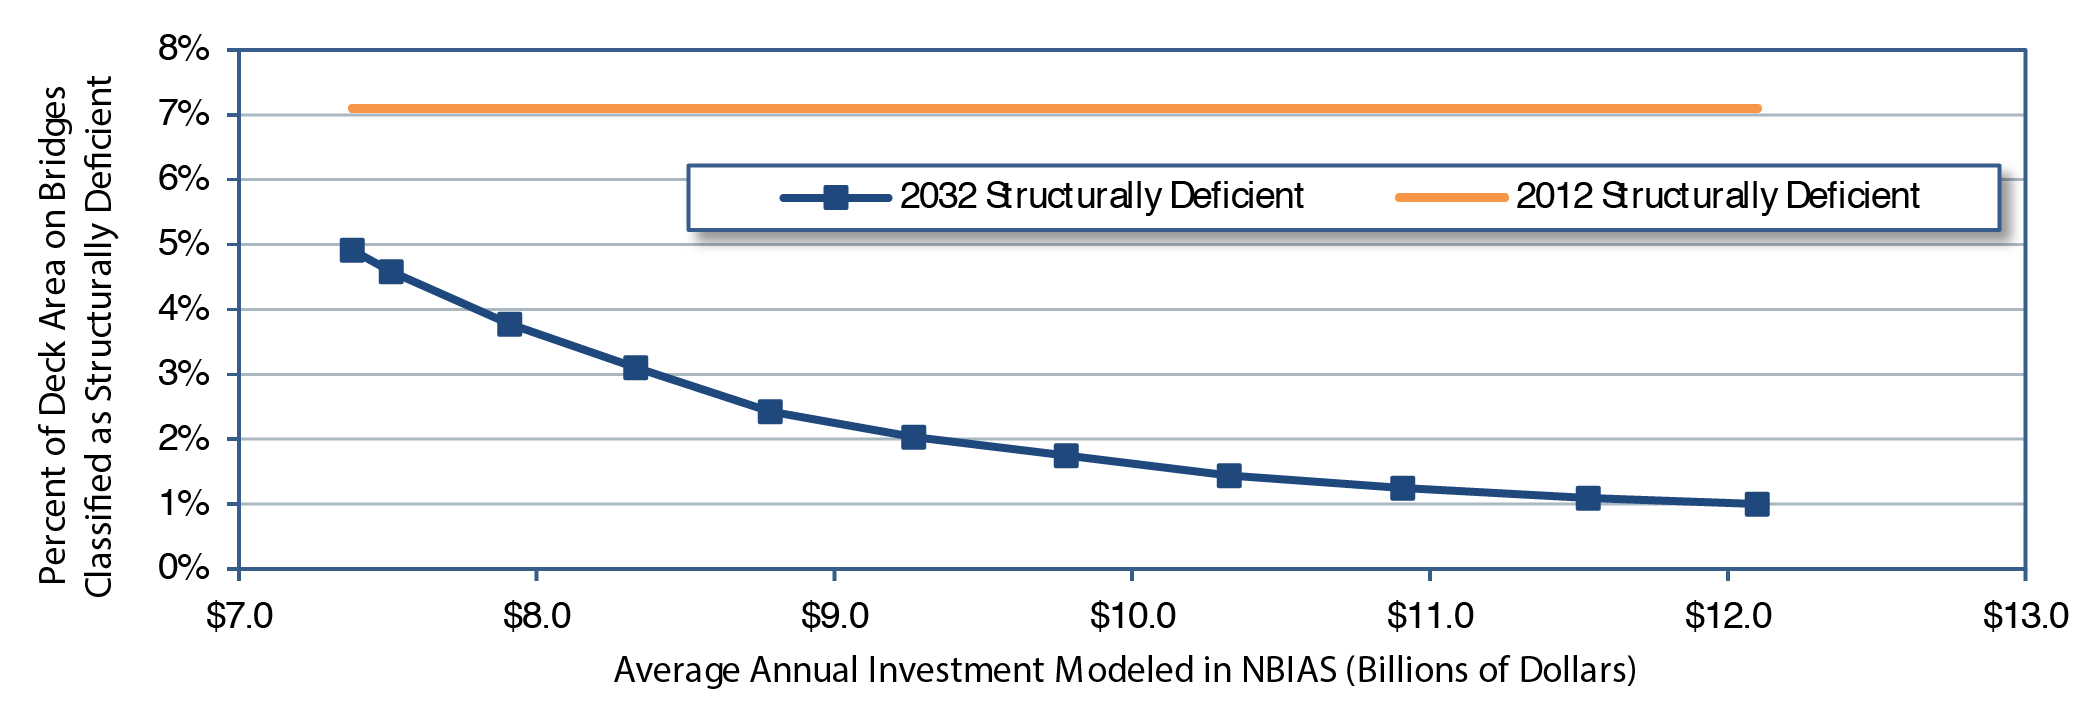 A line graph plots values for percent of deck area on bridges classified as structurally deficient over average annual investment in billions of year 2012 dollars modeled in NBIAS for 2012 and 2032. While the line for 2012 structurally deficient bridges remains at 7.1 percent from $7.4 billion to $12.1 billion, the plot for 2032 structurally deficient bridges has an initial value of 4.9 percent at an annual investment of $7.4 billion and curves smoothly downward to a value of 3.1 percent at an annual investment of $8.3 billion. Continuing downward, the plot reaches a value of 1.4 percent at an annual investment of $10.3 billion, ending at a value of 1.0 percent at an annual investment of $12.1 billion. Source: National Bridge Investment Analysis System.